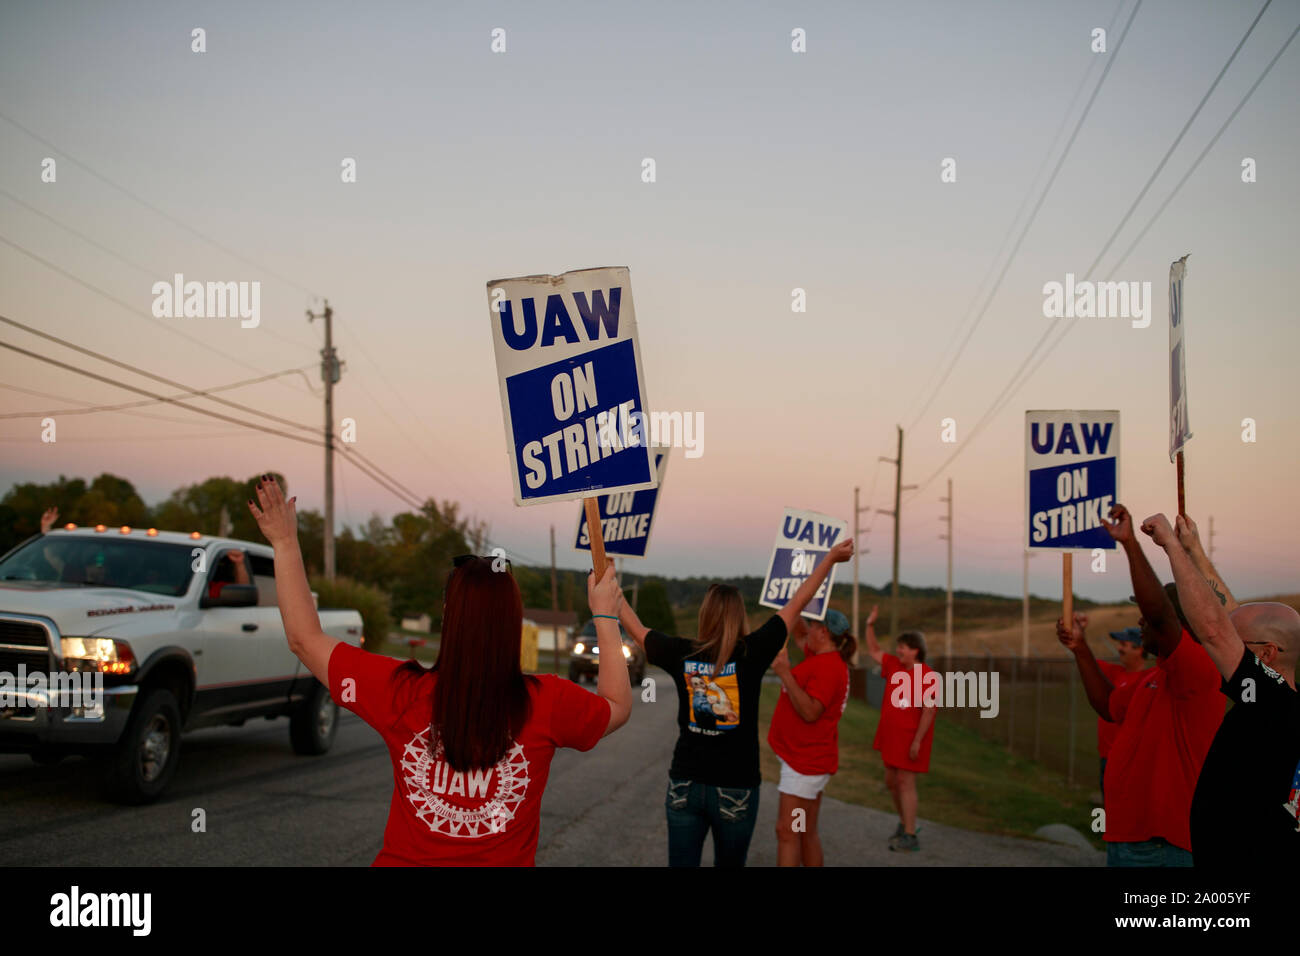 Workers from United Auto Workers Local 440 picket outside the General Motors Bedford Powertrain factory, where parts are molded from liquid metal, as the sun sets on day three of a nationwide worker strike against GM, Wednesday, September 18, 2019 in Bedford, Ind. The workers walked off the job at midnight on September 16th after their contract ran out, and are asking for better pay, affordable healthcare, that temp workers be made permanent, that jobs not be sent overseas, and that some factories, like the one in Lordtown, Ohio, be reopened. More than 700 workers at the Bedford, Indiana, fact Stock Photo